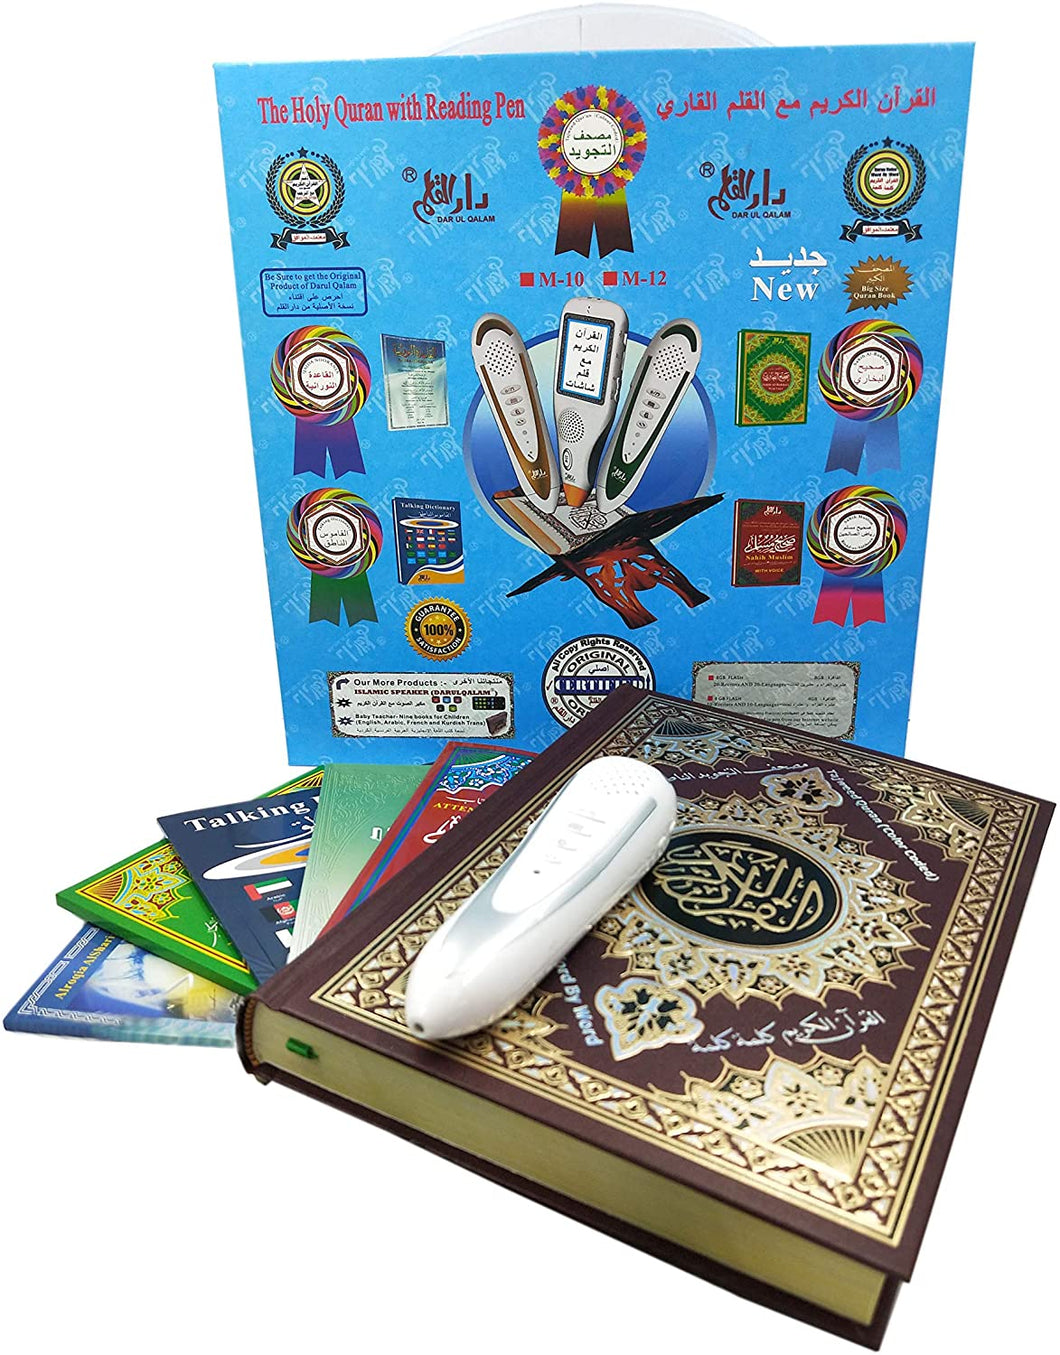 The Holy Quran With Reading Pen